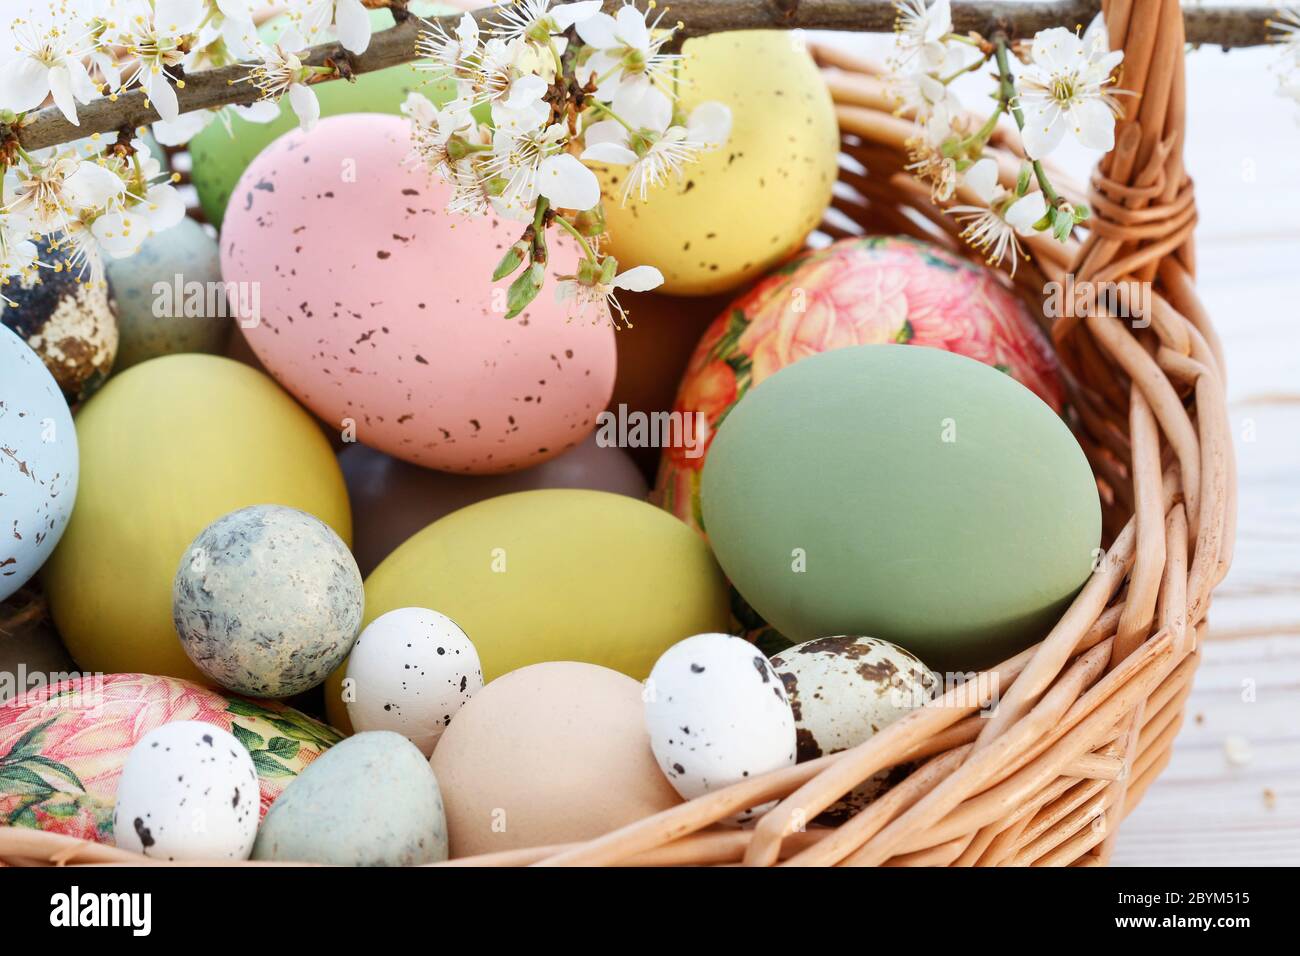 Basket with Easter eggs and cherry blossom branch. Festive decor Stock Photo